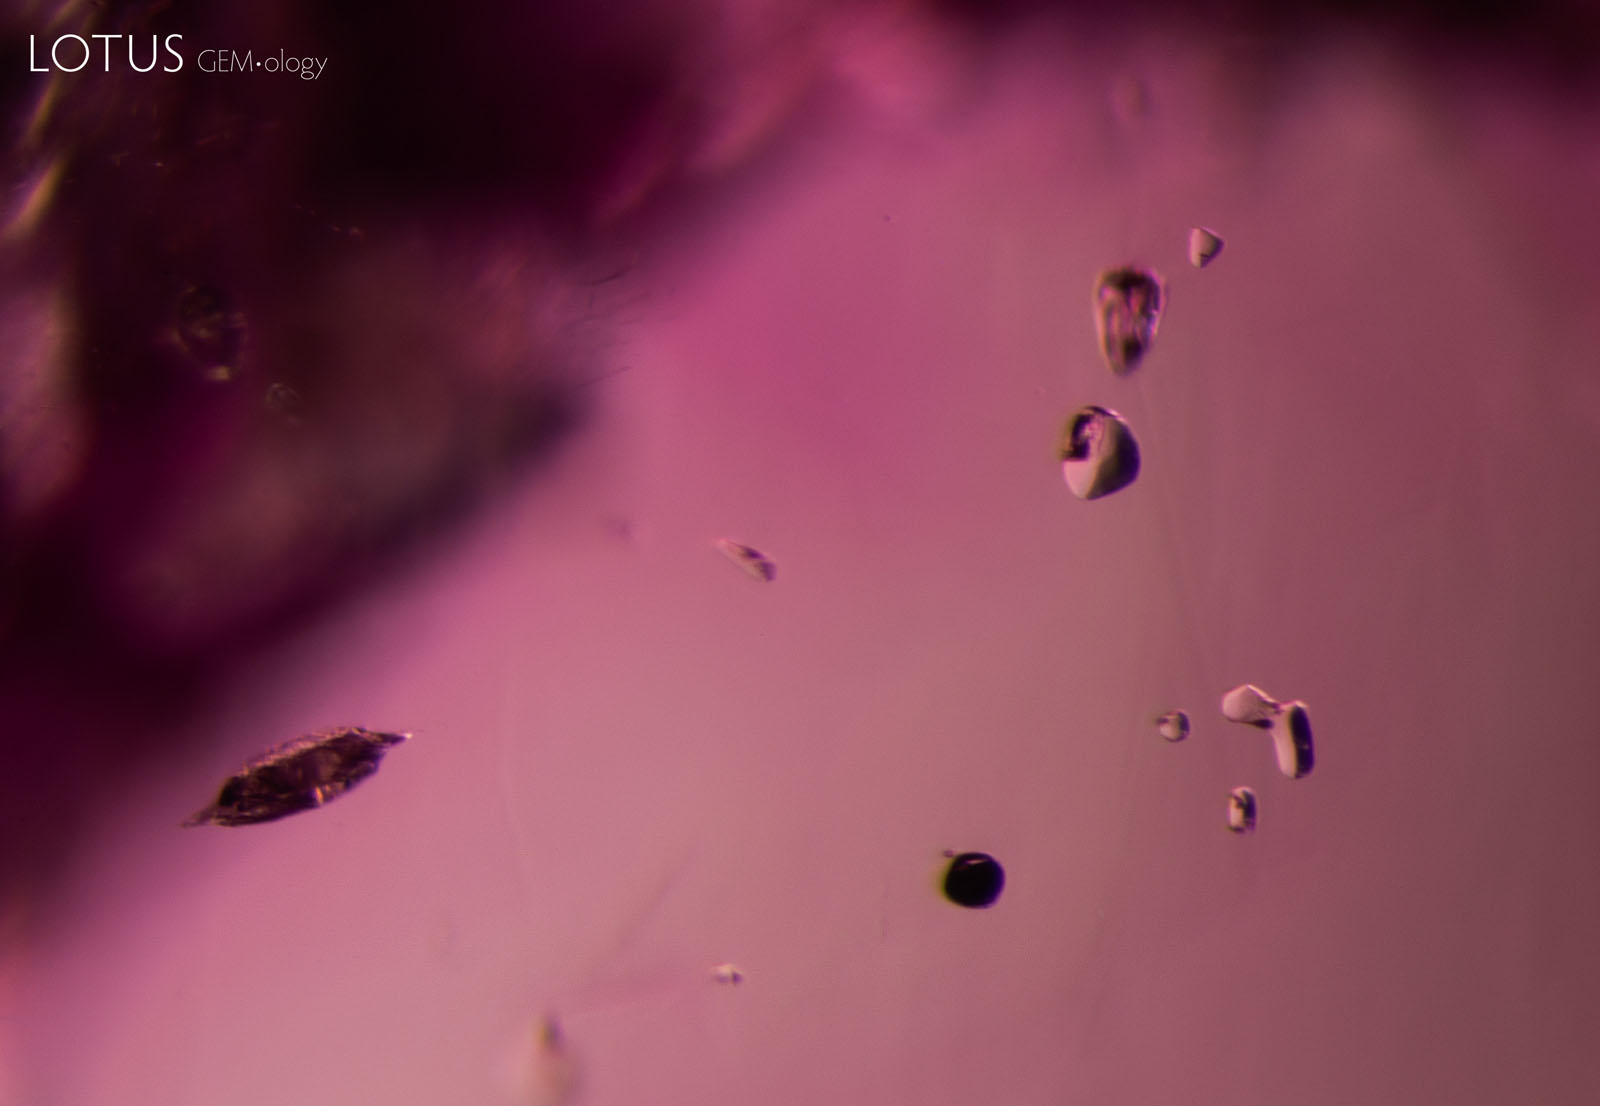 (Unheated) A variety of solid inclusions are present in sample 22. At left is a crystal containing diaspore, on the right are several transparent spinel crystals, and at the bottom right is a dark, rounded crystal of primary rutile.